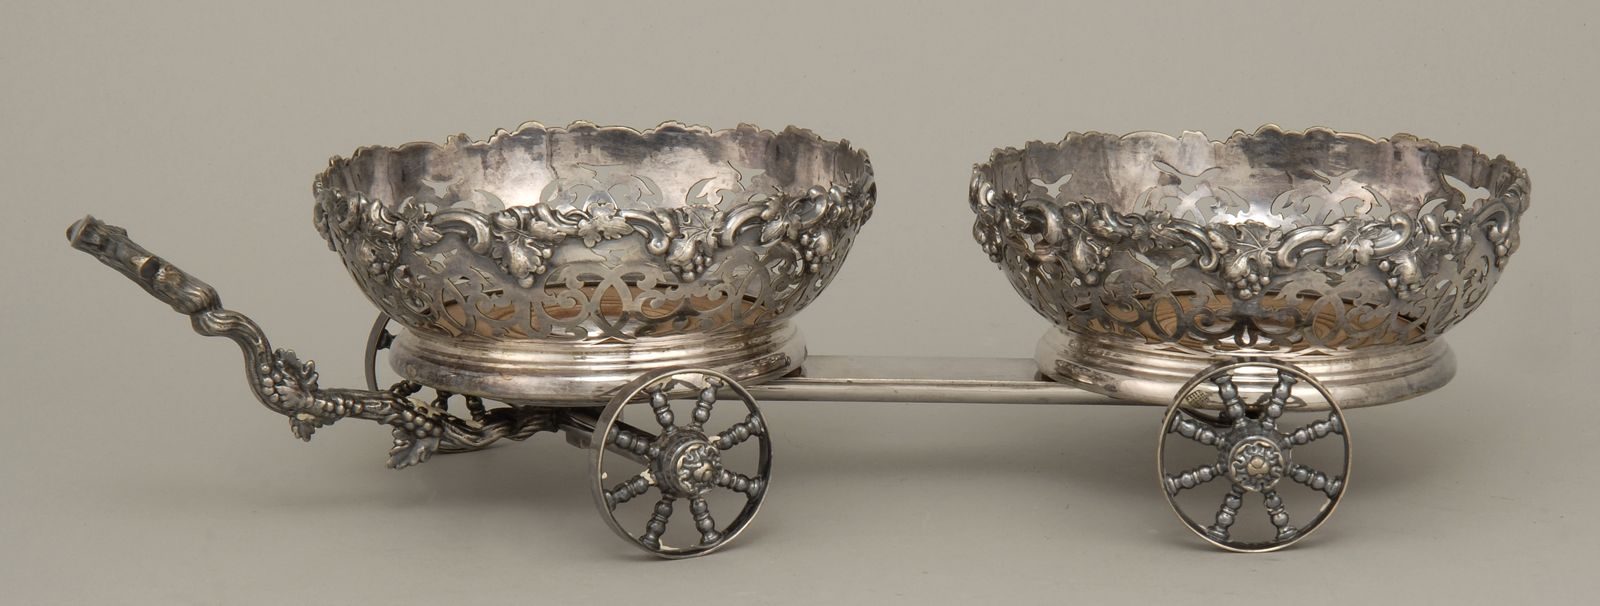 SHEFFIELD SILVER PLATED DOUBLE